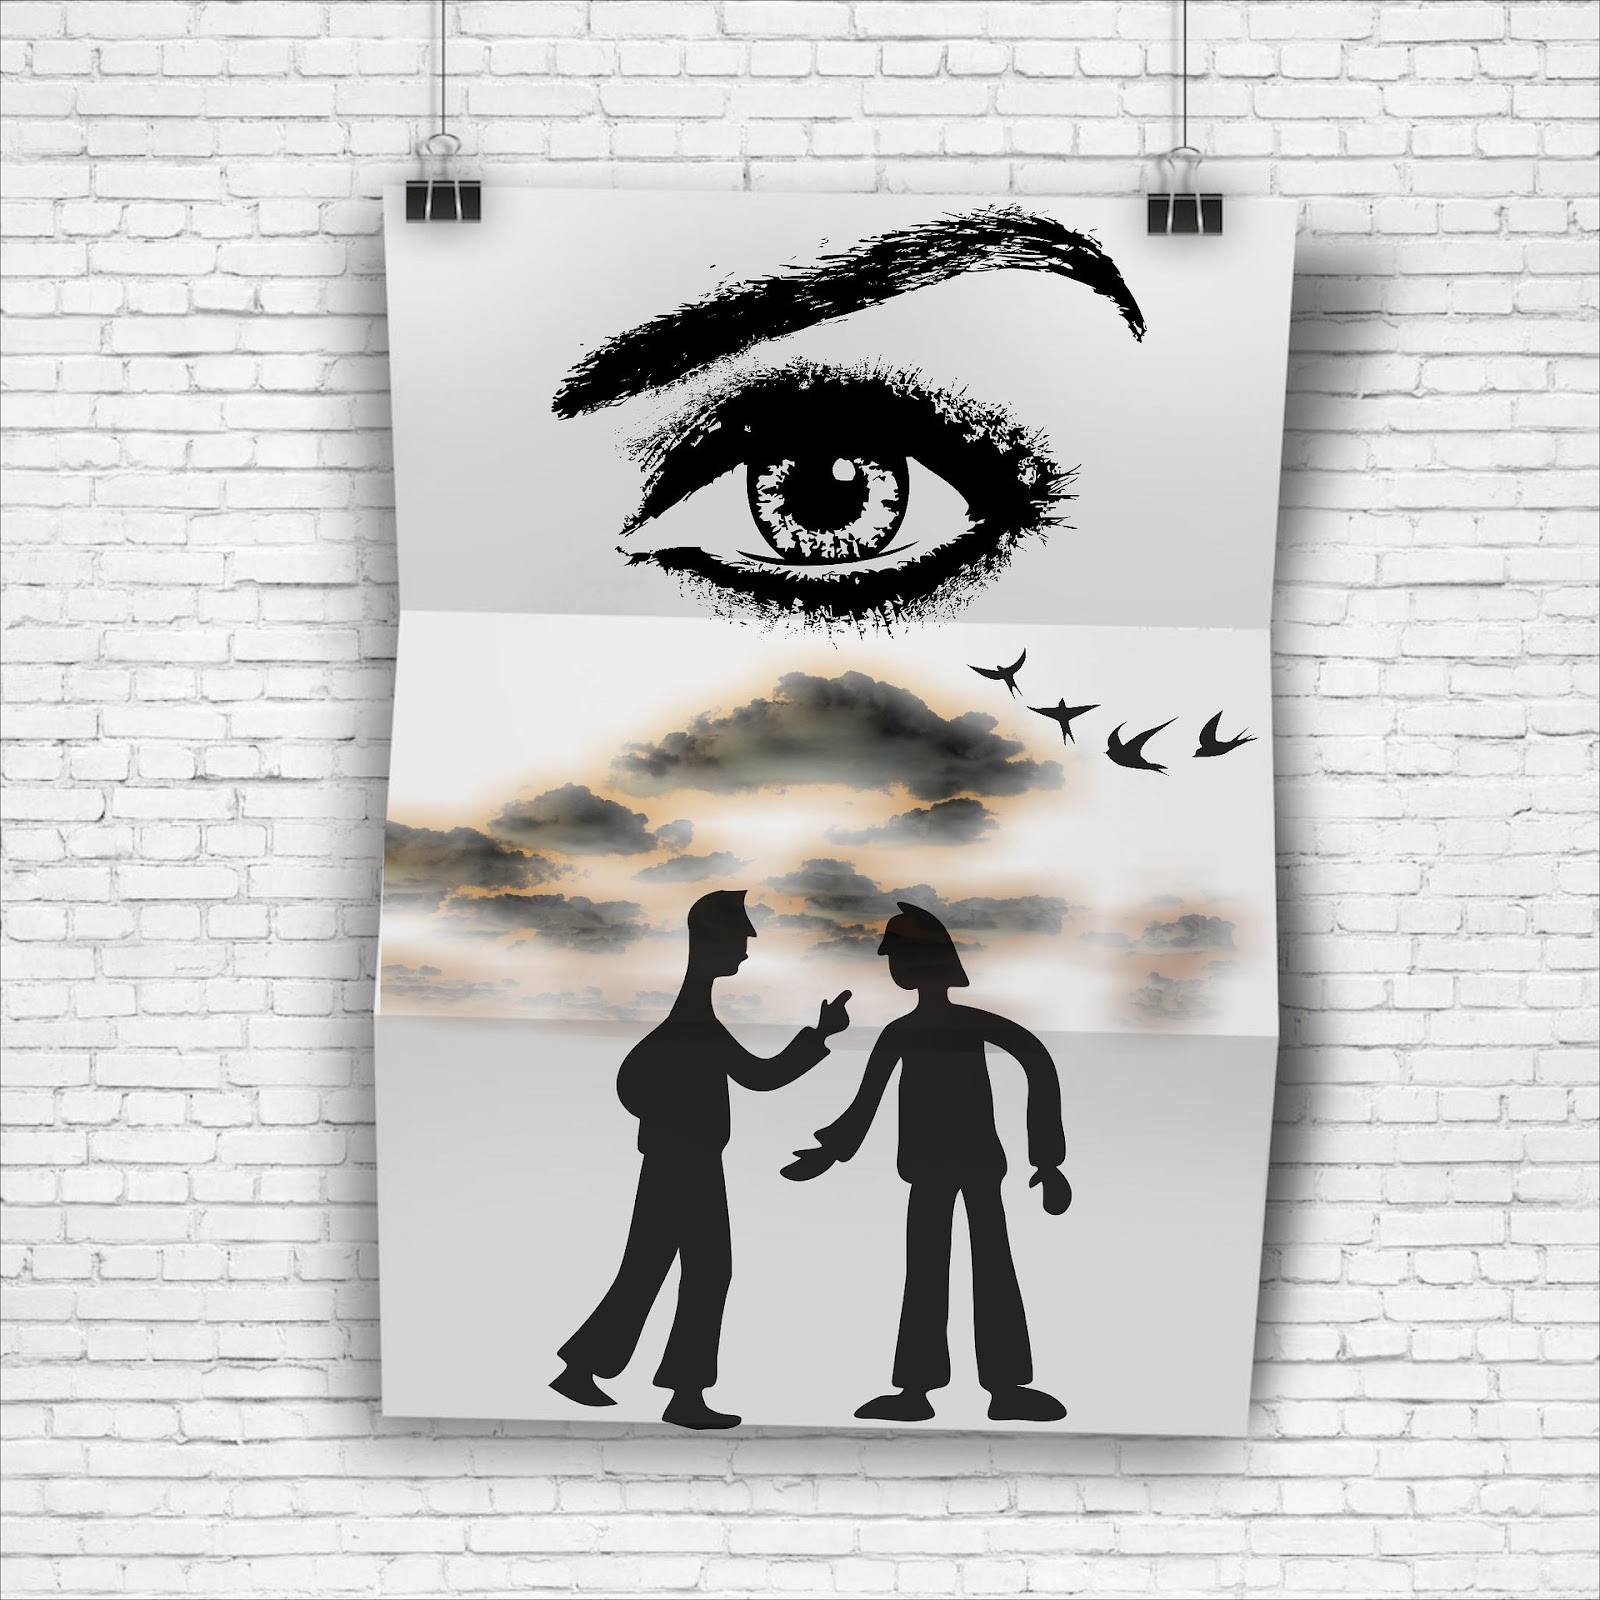 A large eye with arched eyebrow drawn up above a scene of two people gesticulating, presumably arguing.